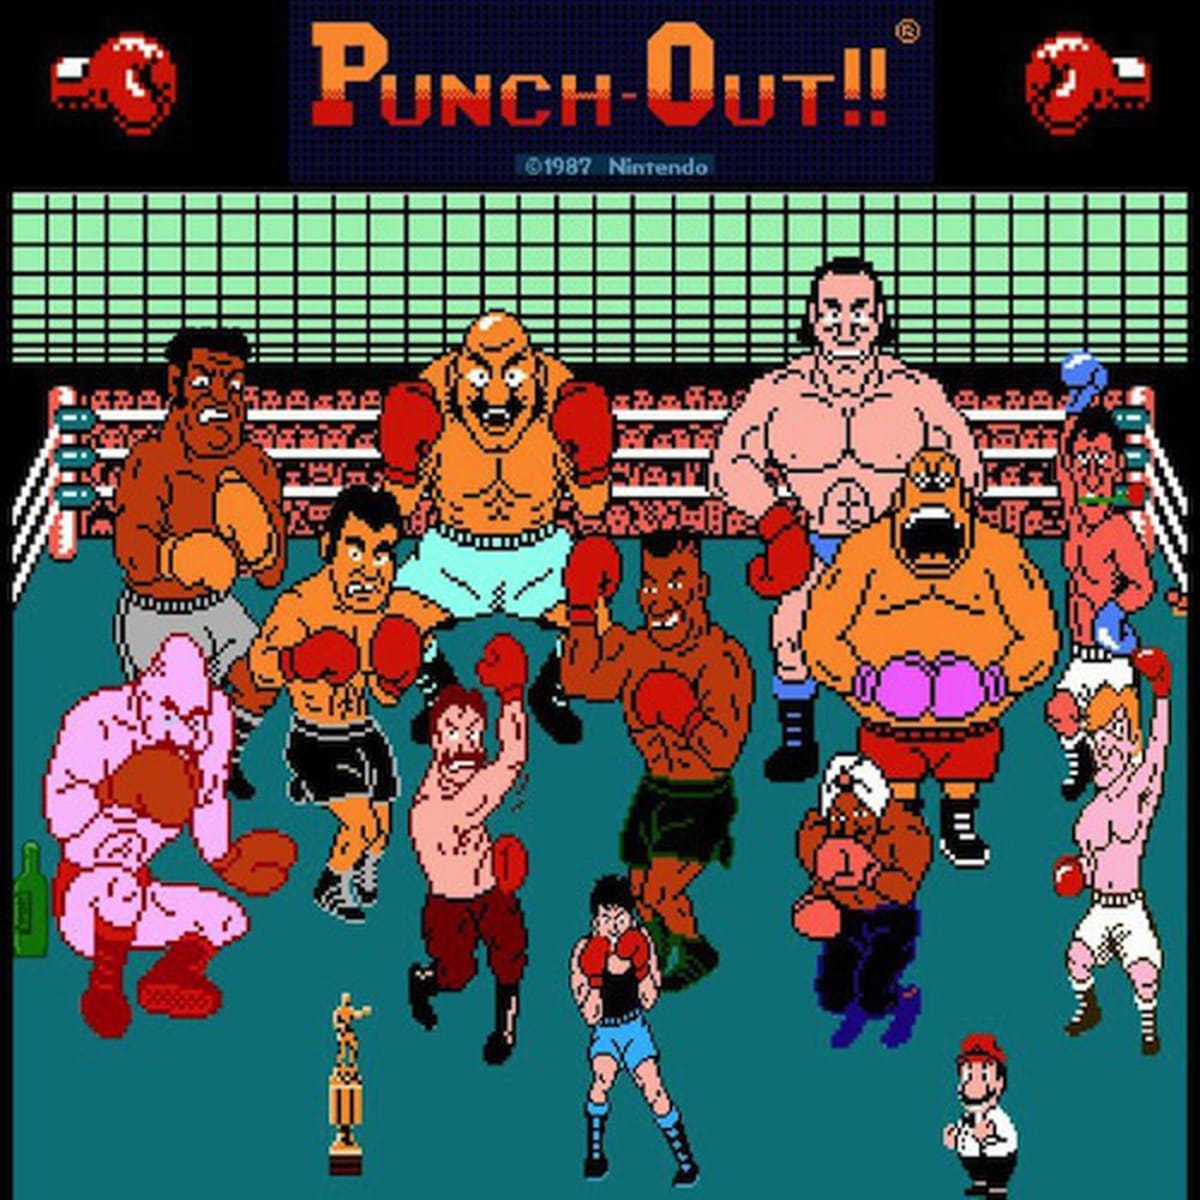 The Complete List of Mike Tyson's Punch Out